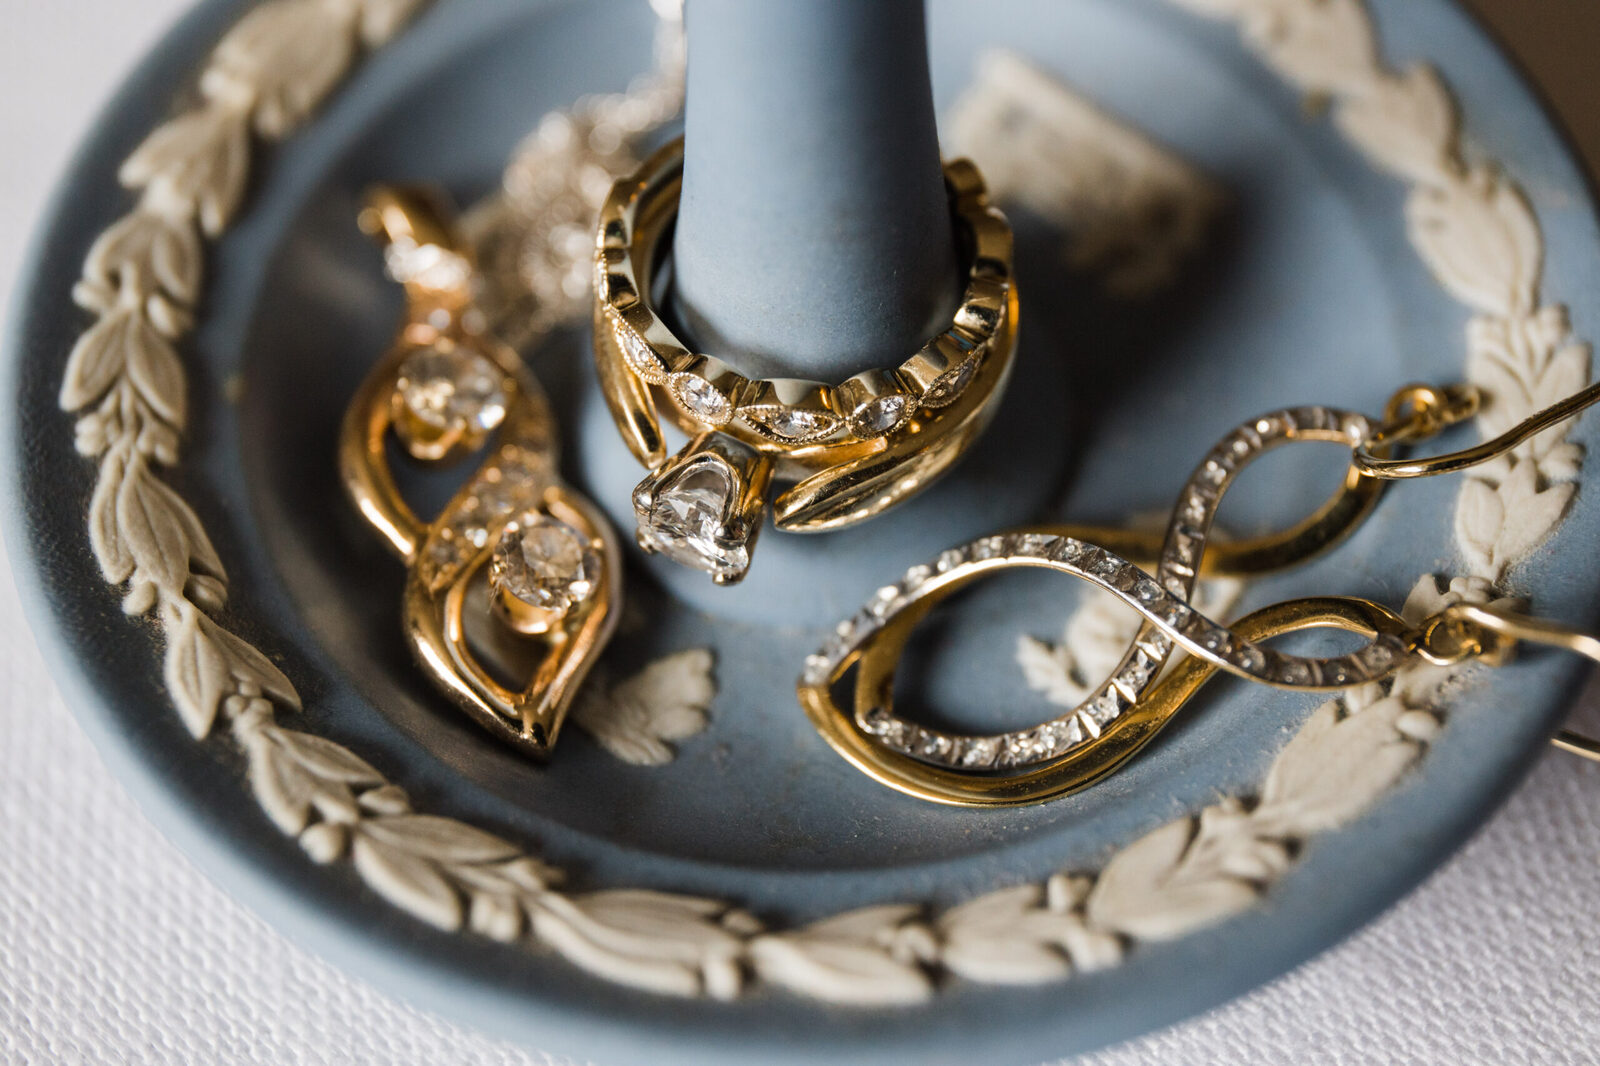 brides engagement ring and wedding jewelry on family heirloom dish